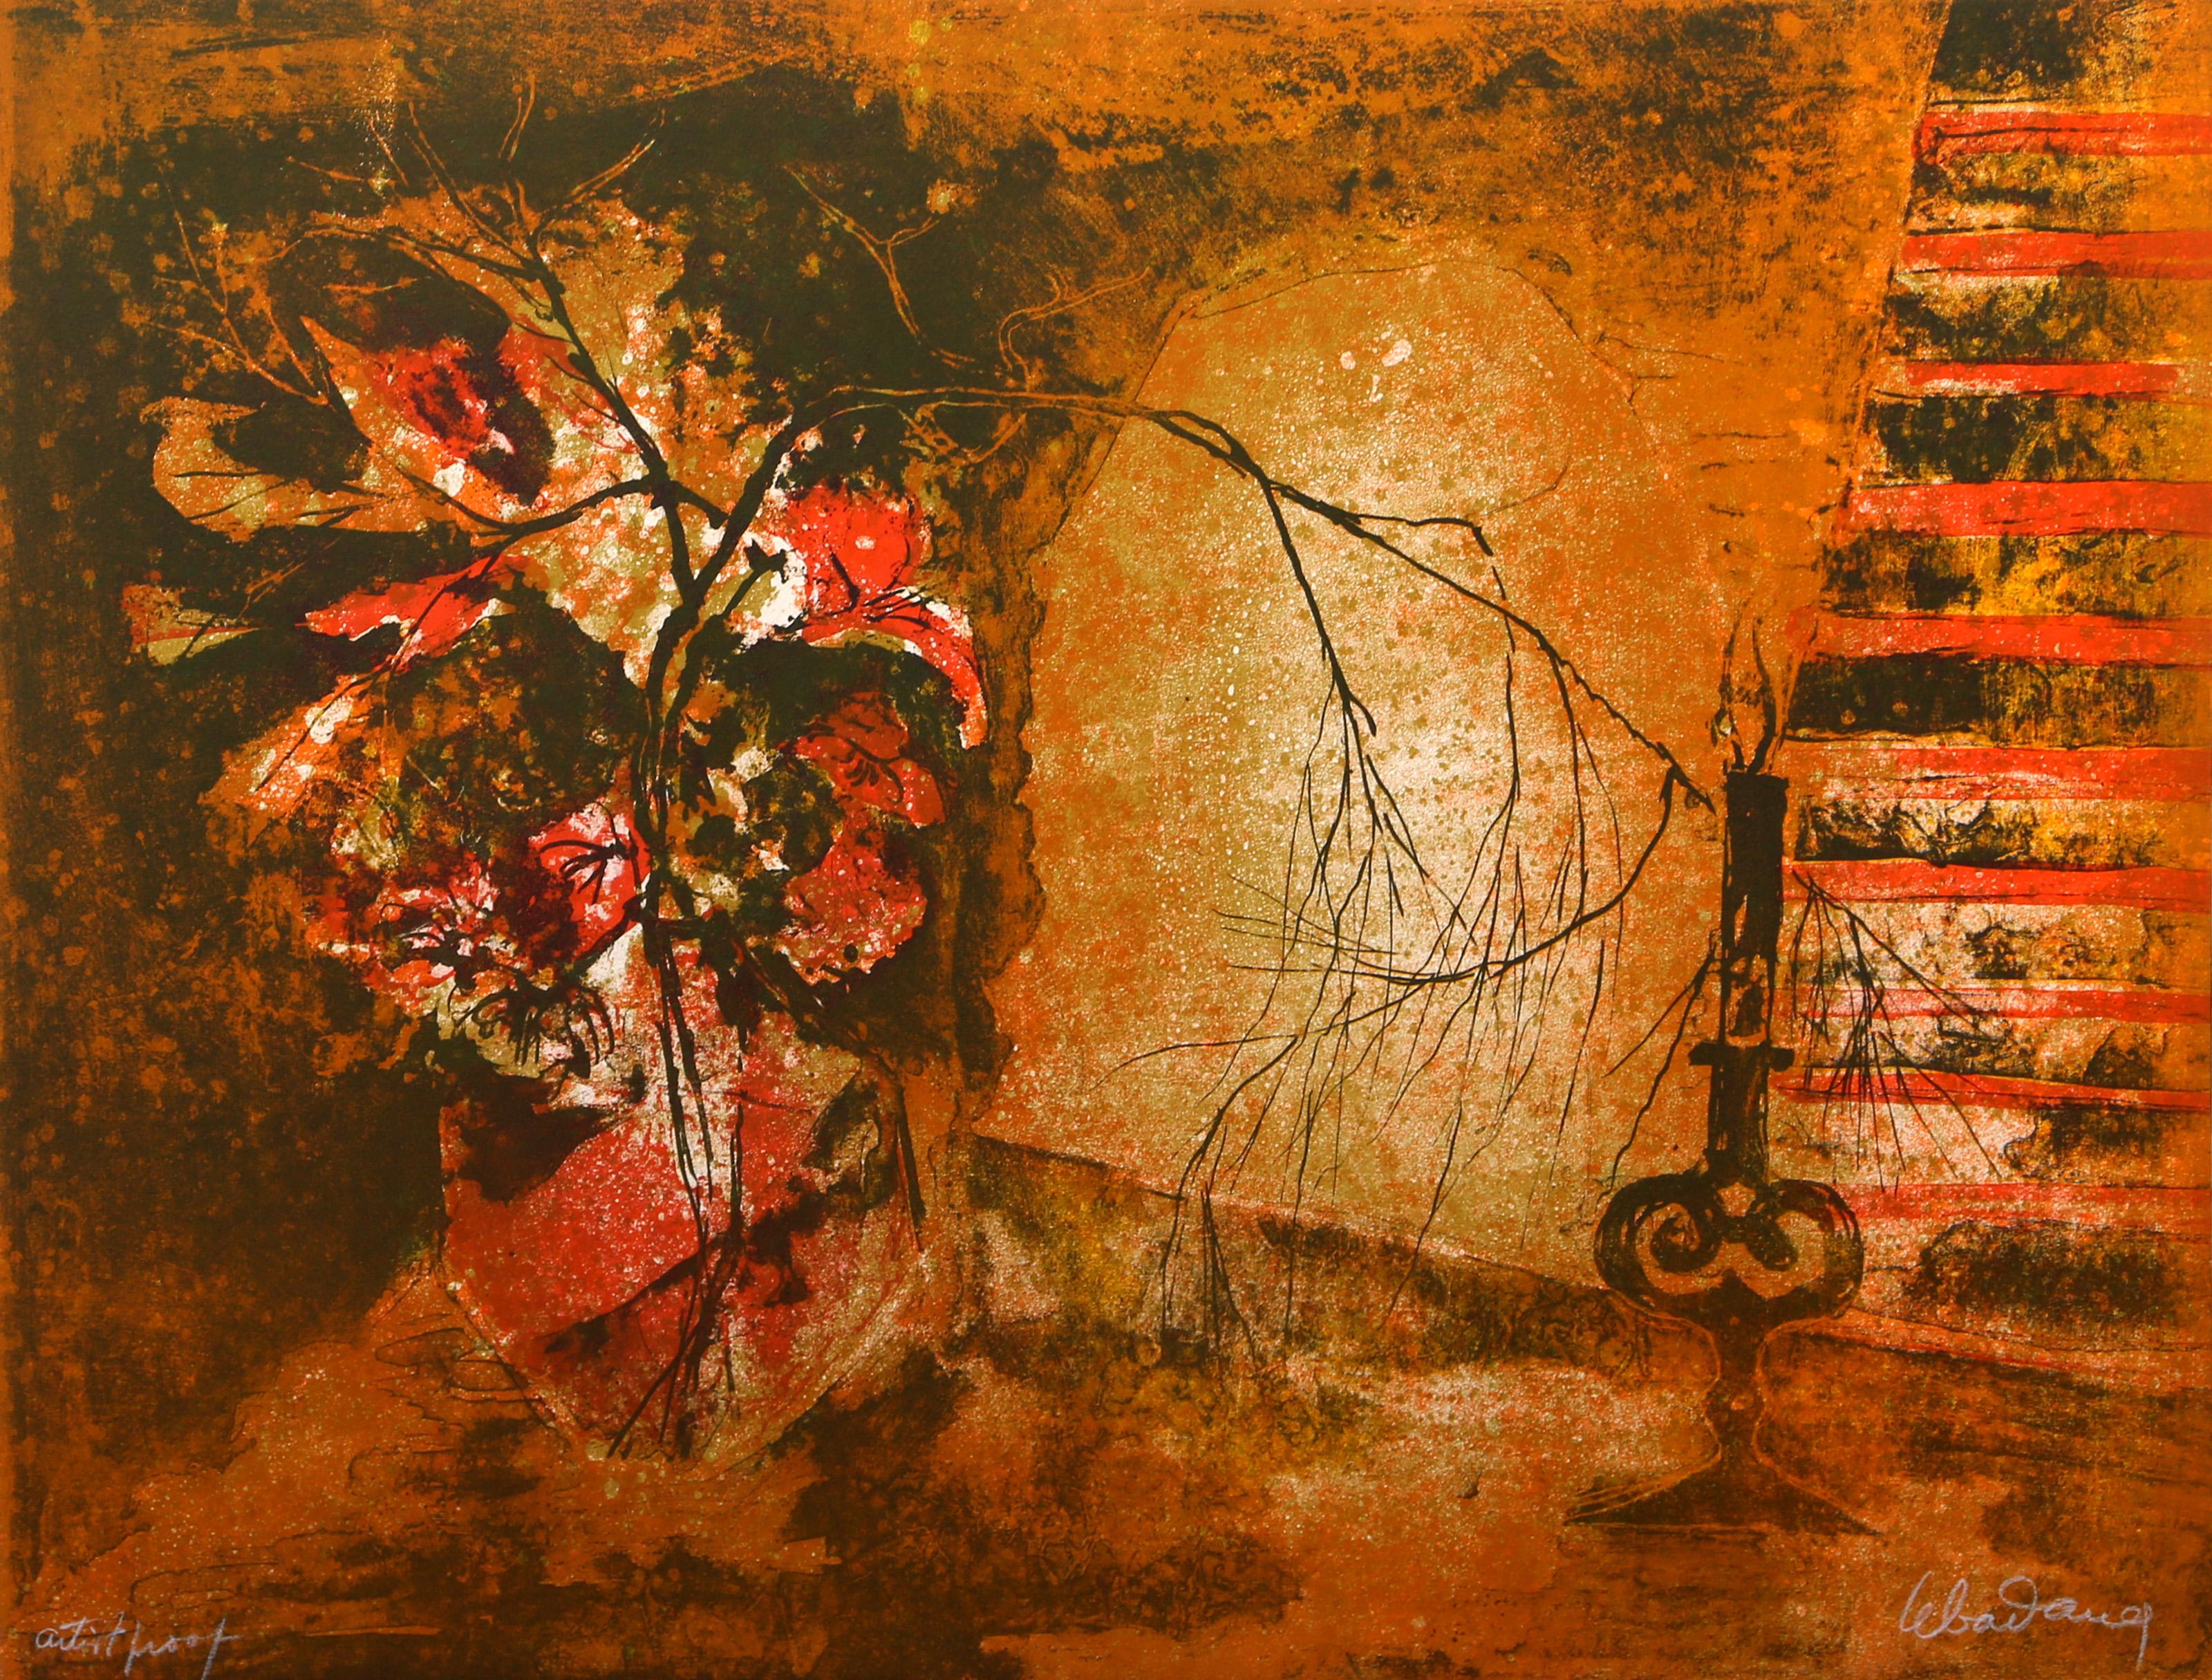 Lebadang (aka Hoi), Vietnamese (1922 - 2015) -  Still Life in Orange. Medium: Lithograph, signed and numbered in pencil, Edition: E.A., Size: 25.5 x 19.5 in. (64.77 x 49.53 cm), Description: Lebadang was a Vietnam-born French artist whose work